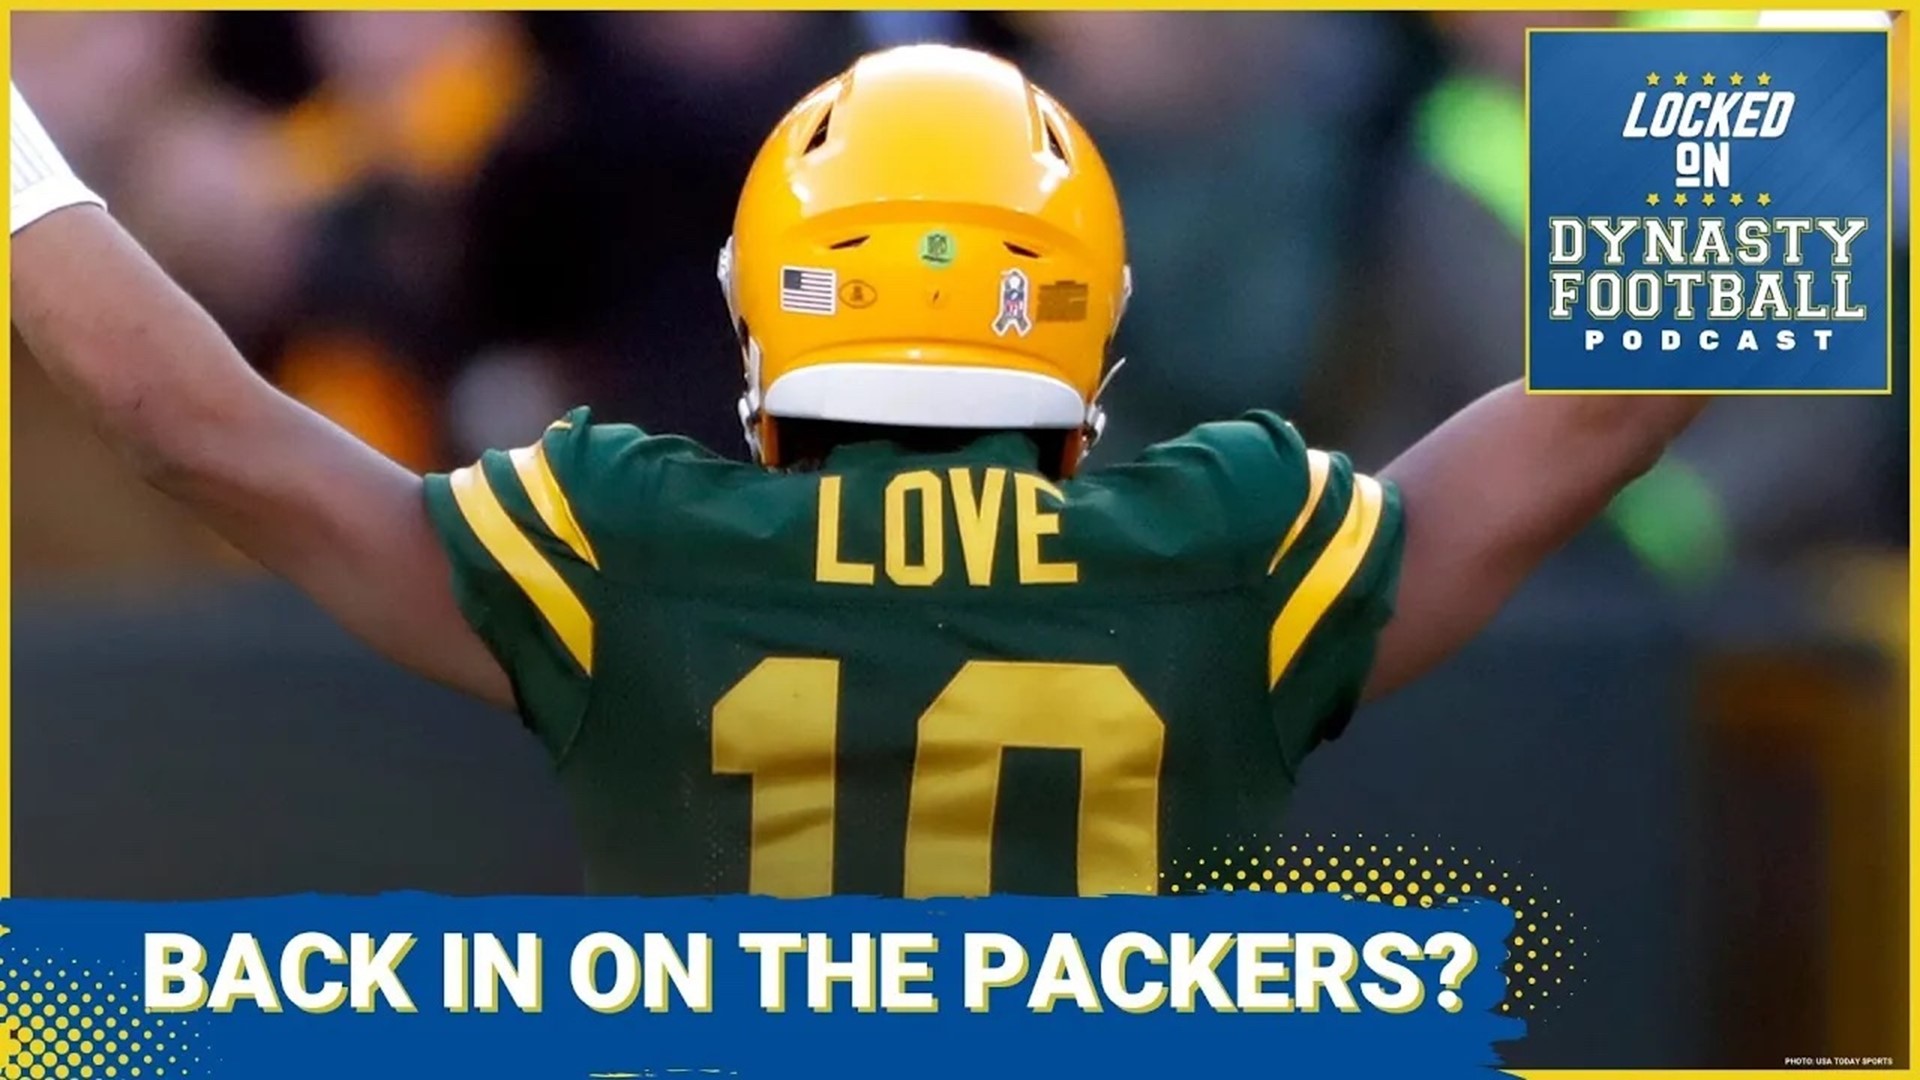 Jordan Love and the Green Bay Packers had a huge performance on Thanksgiving against the Detroit Lions. Should you consider buying back in on Love?